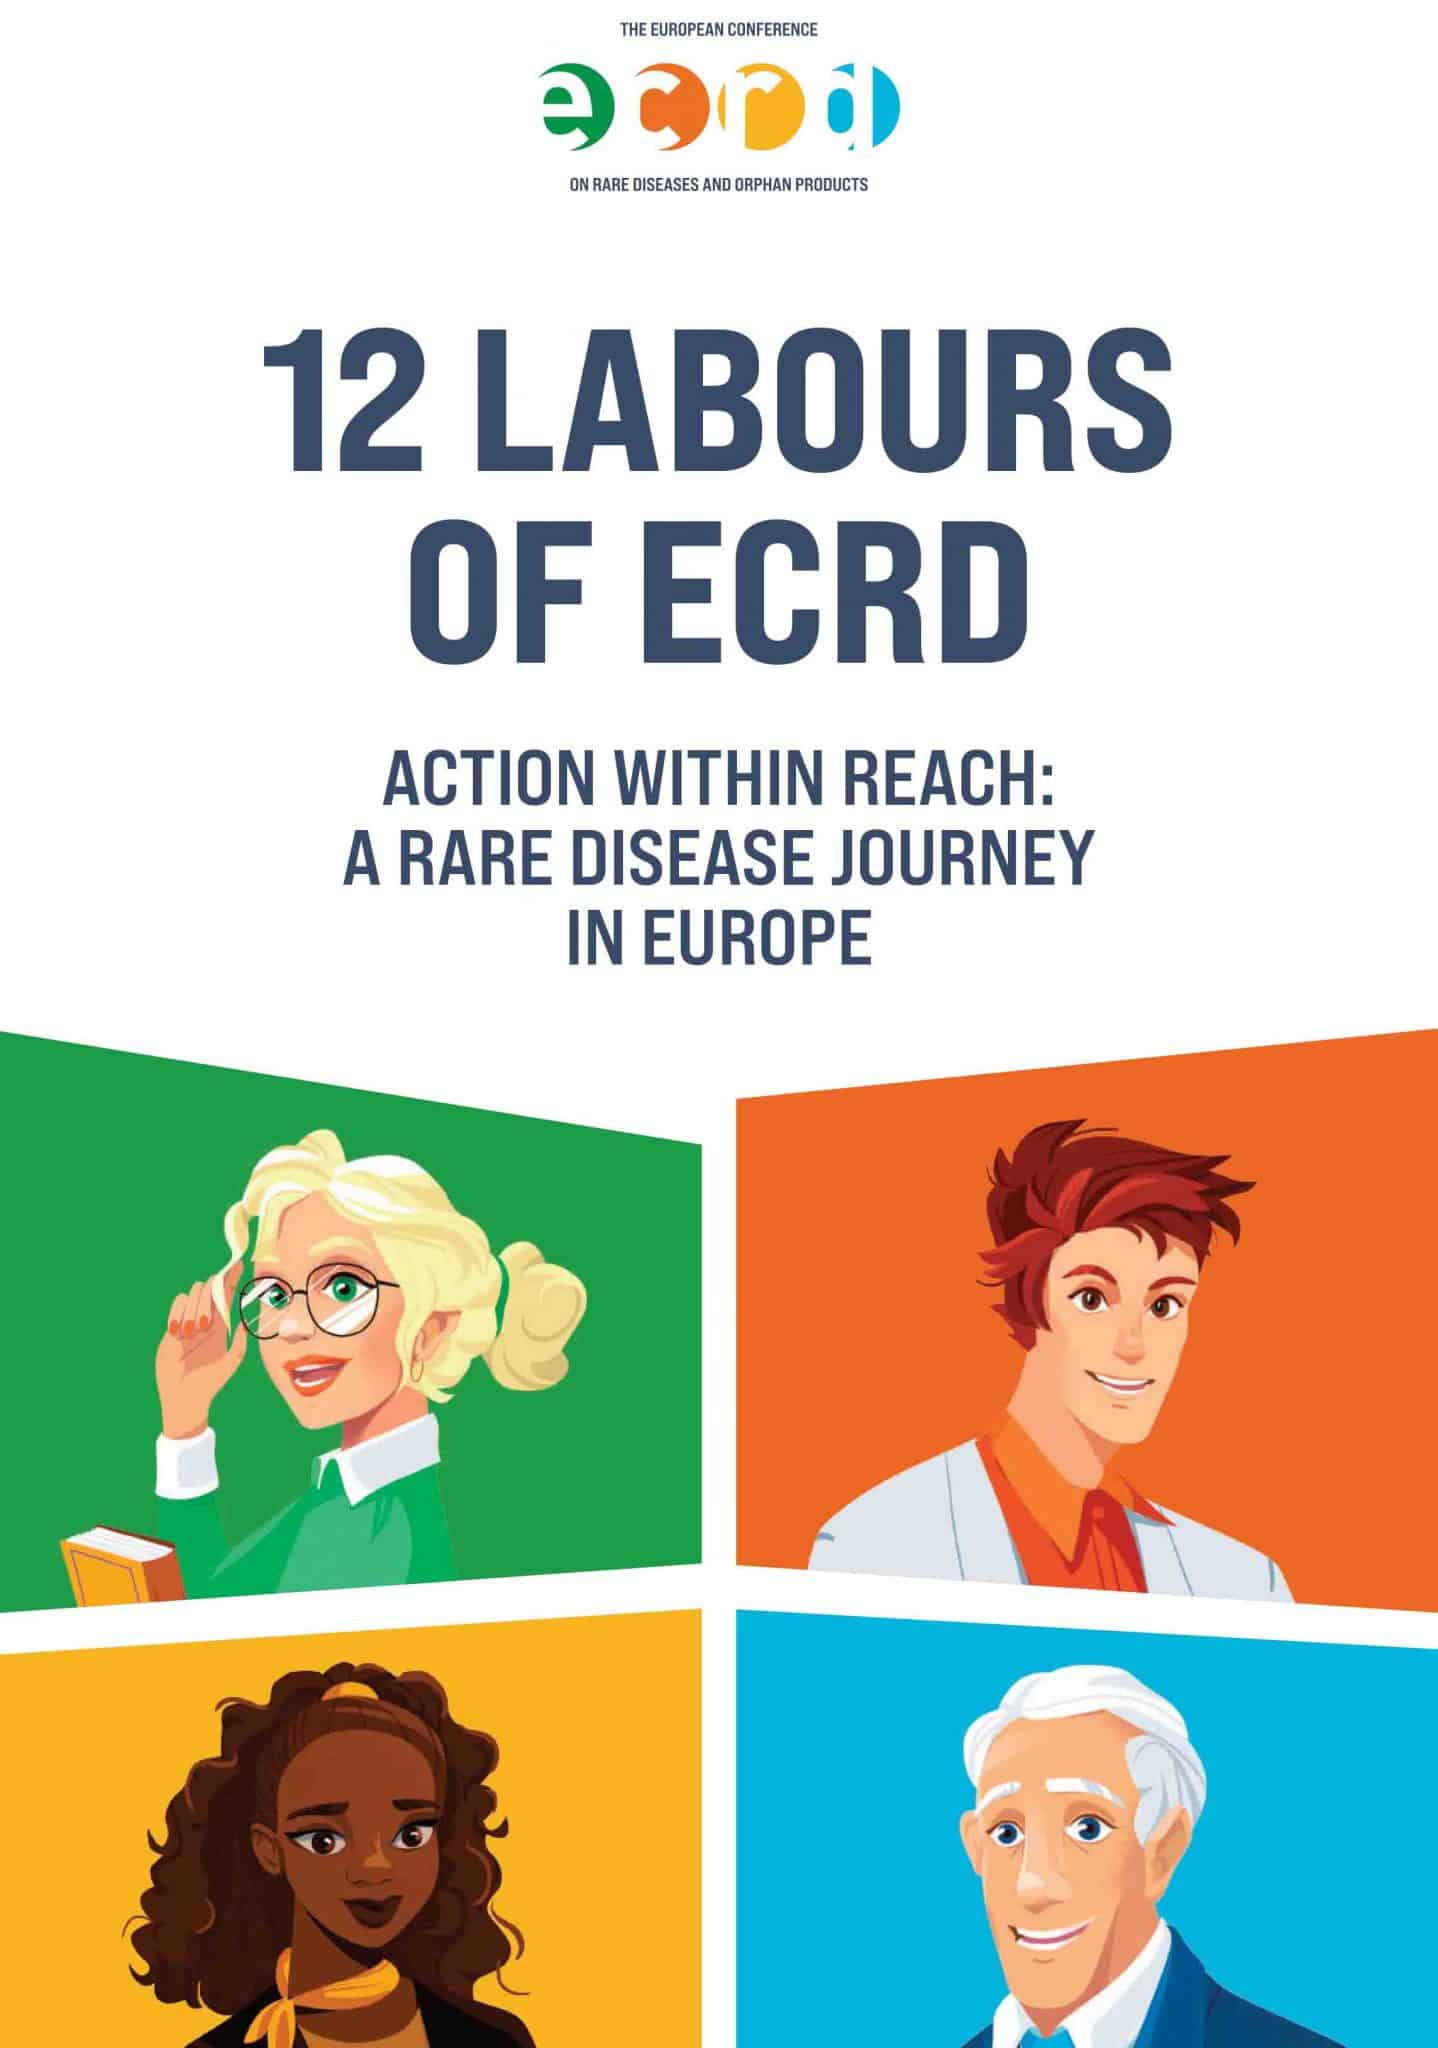 12 Labours of ECRD